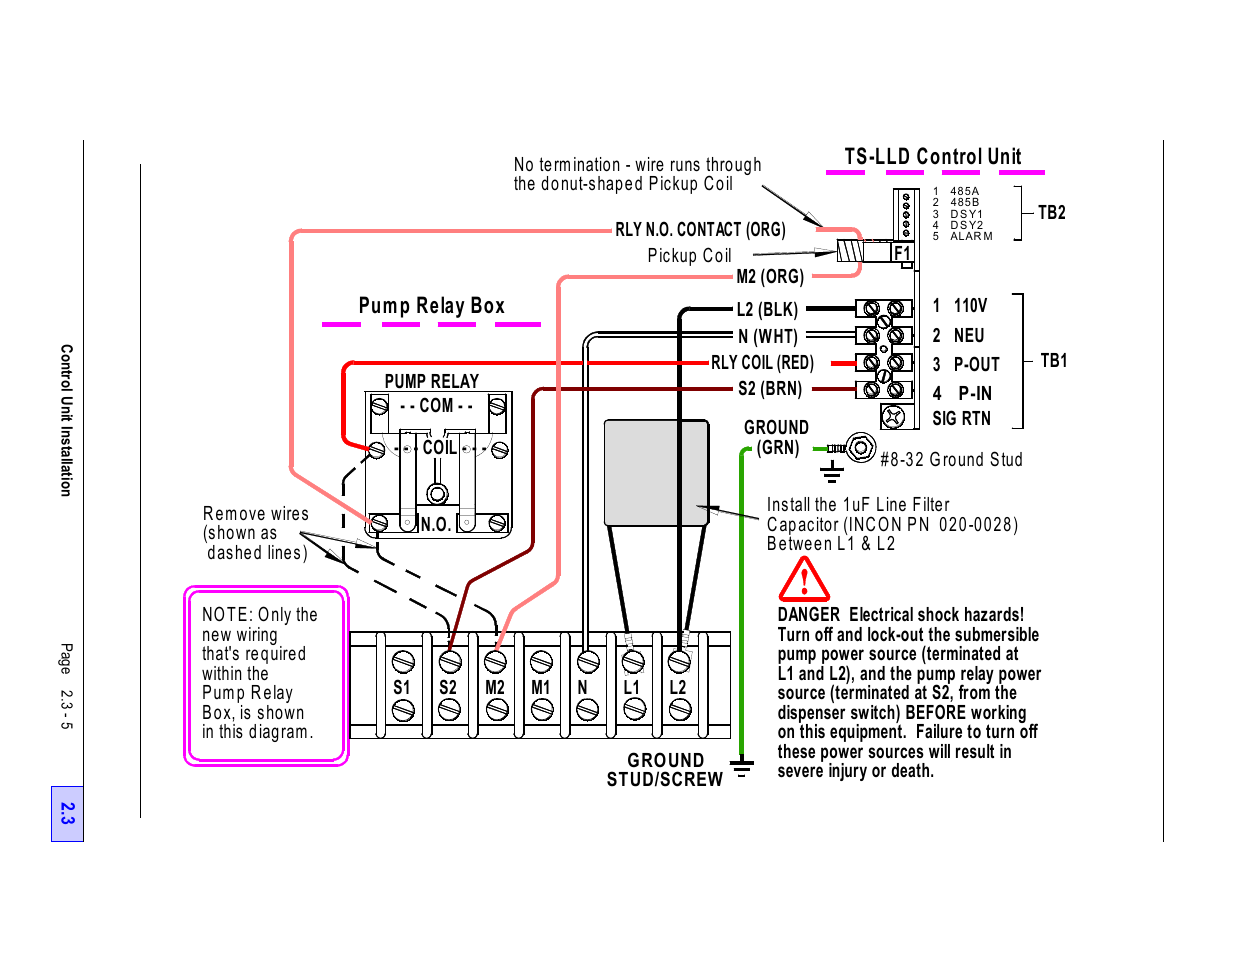 Figure 2.3-4 typical single phase 240 vac, Pump relay box & control